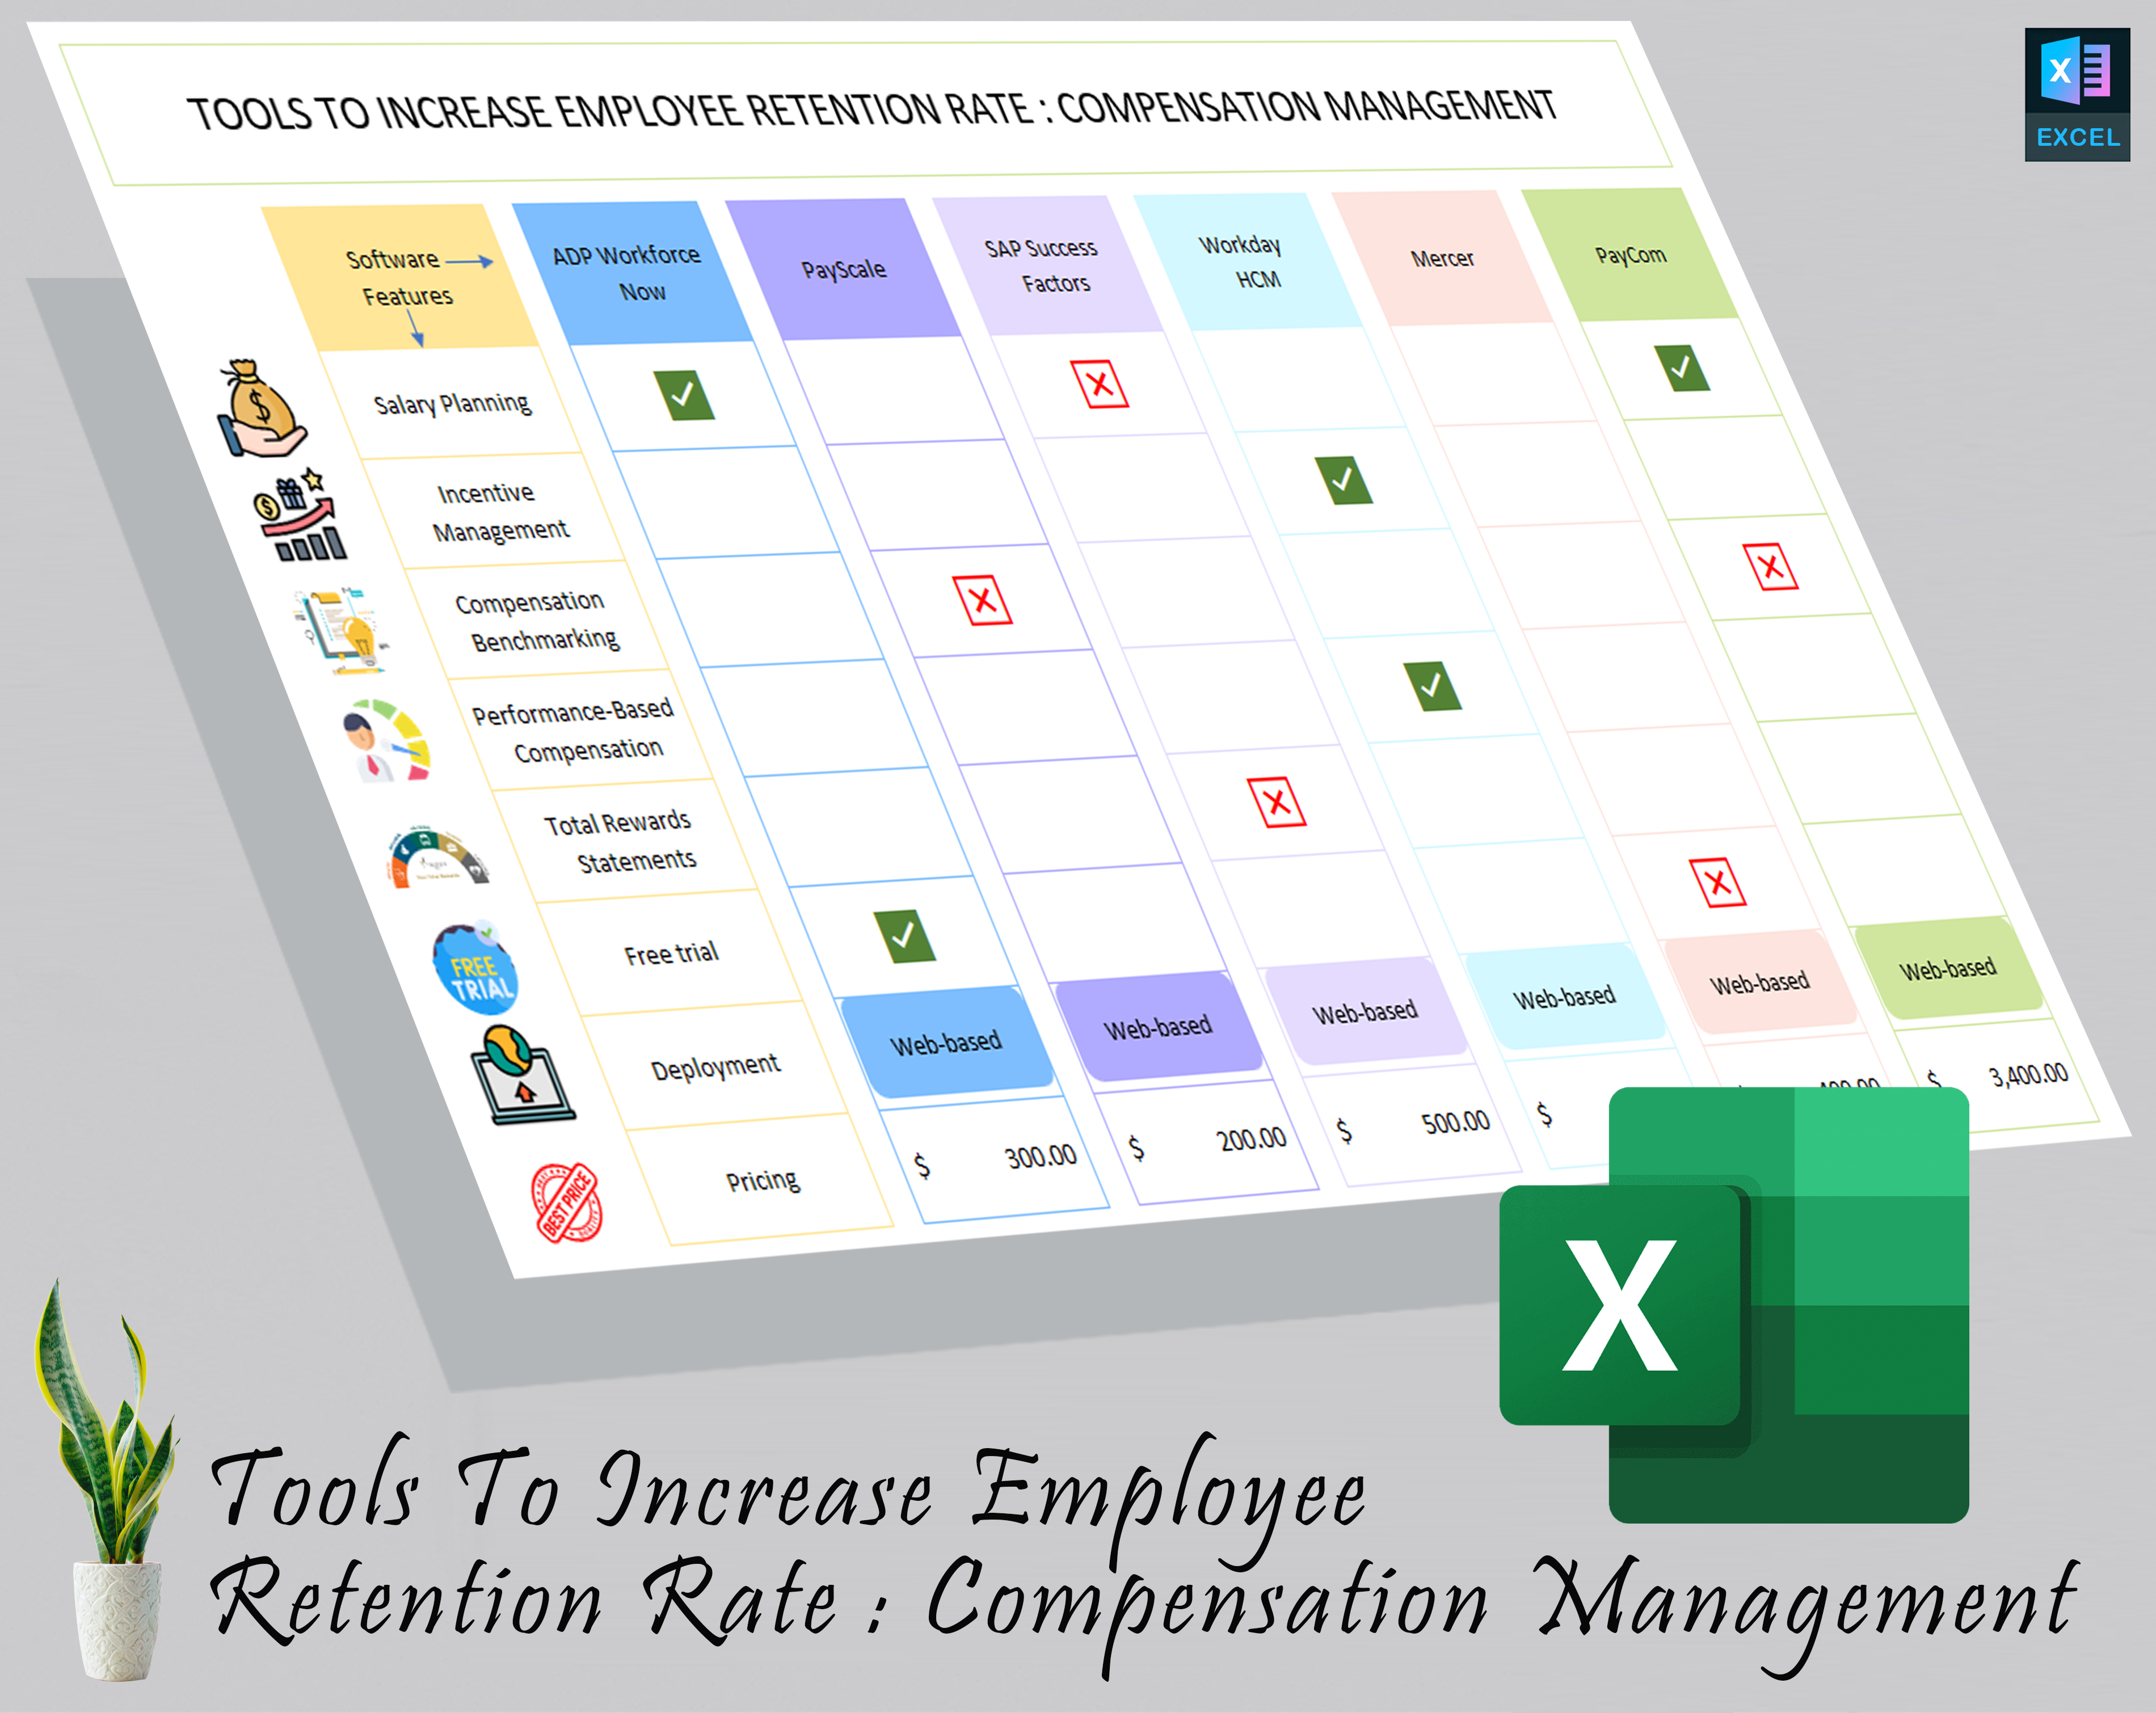 Tools To Increase Employee Retention